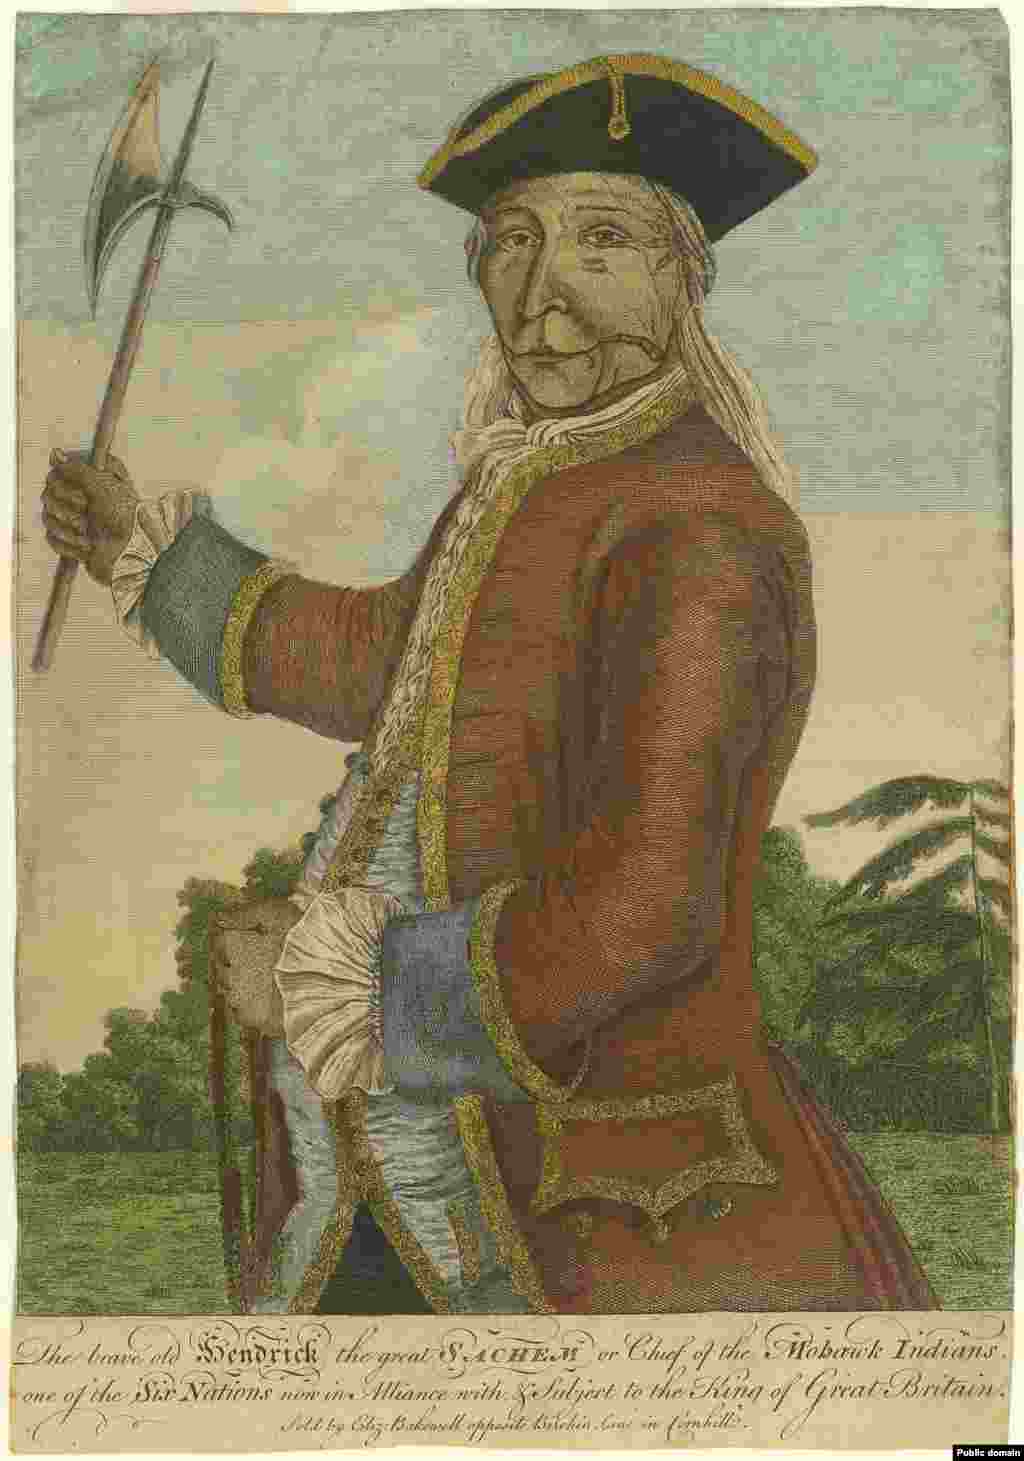 A tinted engraving of Mohawk leader Hendrick Theyanoguin published in London in 1755. His face is tattooed and he holds a strand of wampum.